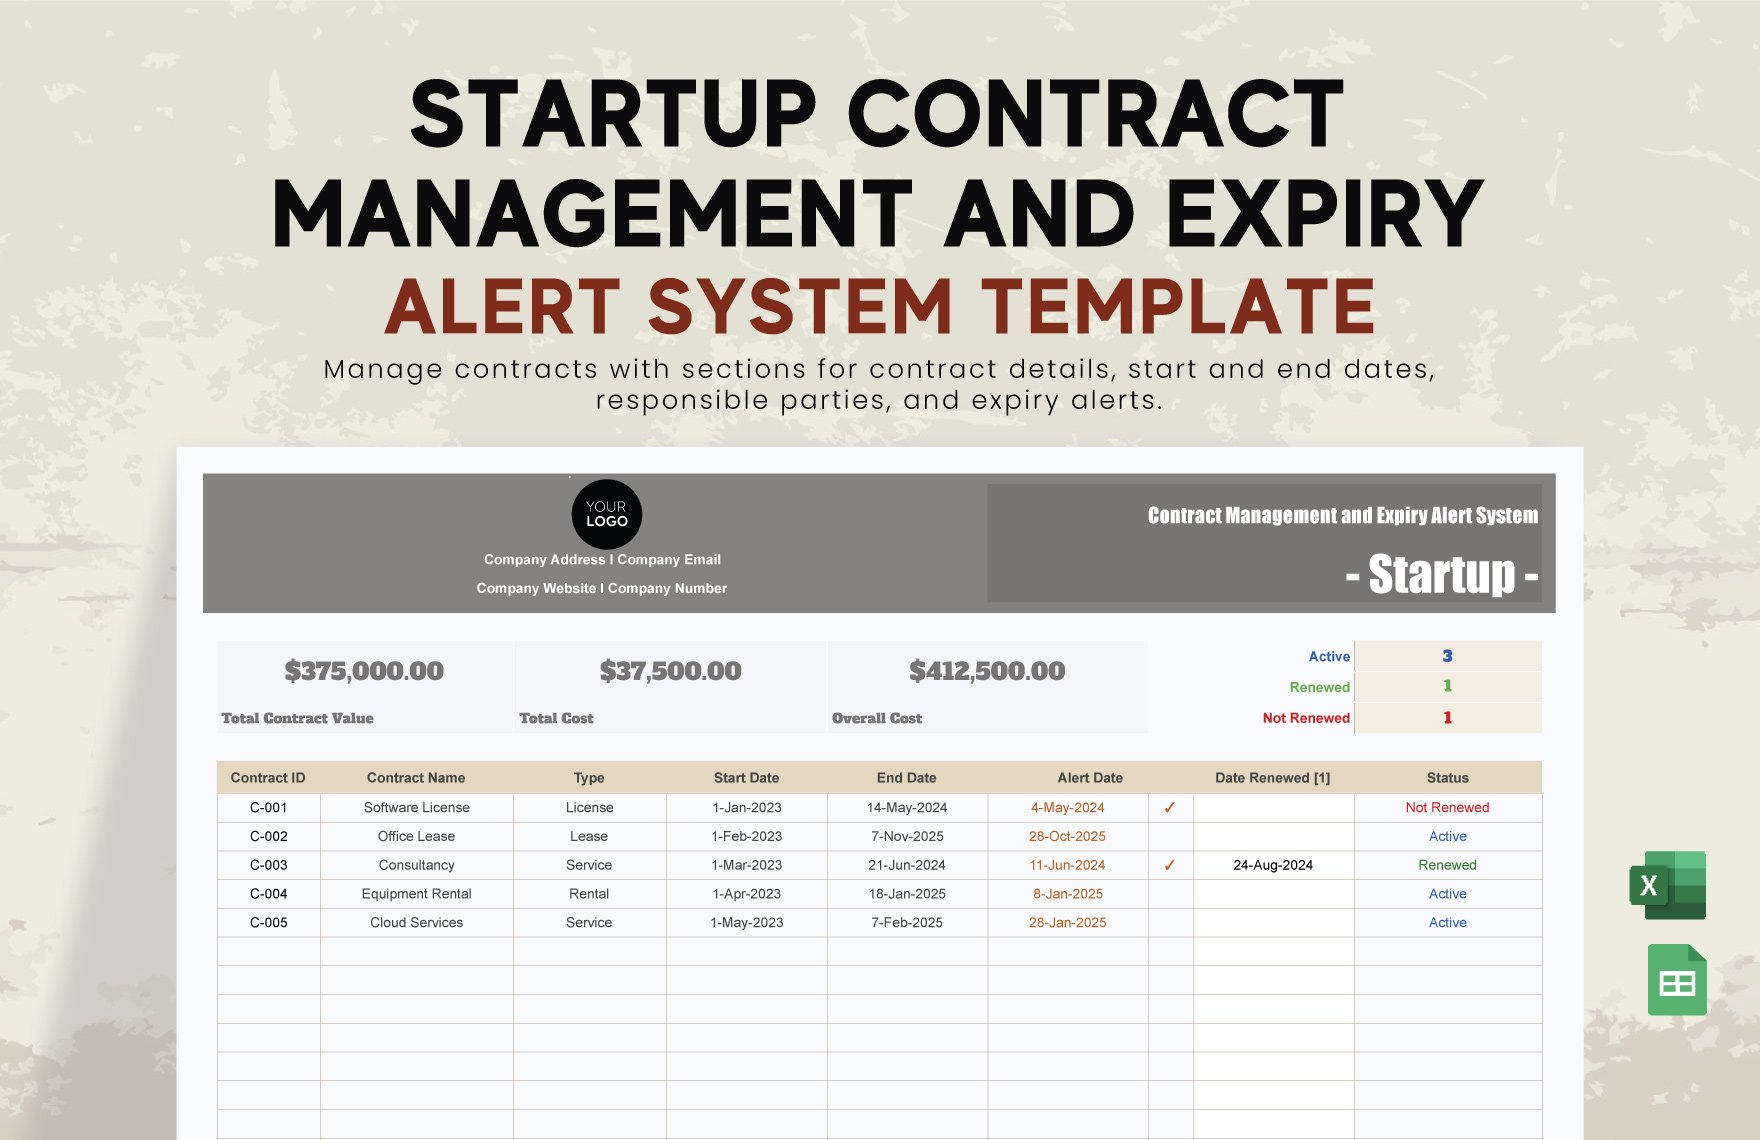 Startup Contract Management and Expiry Alert System Template in Excel, Google Sheets